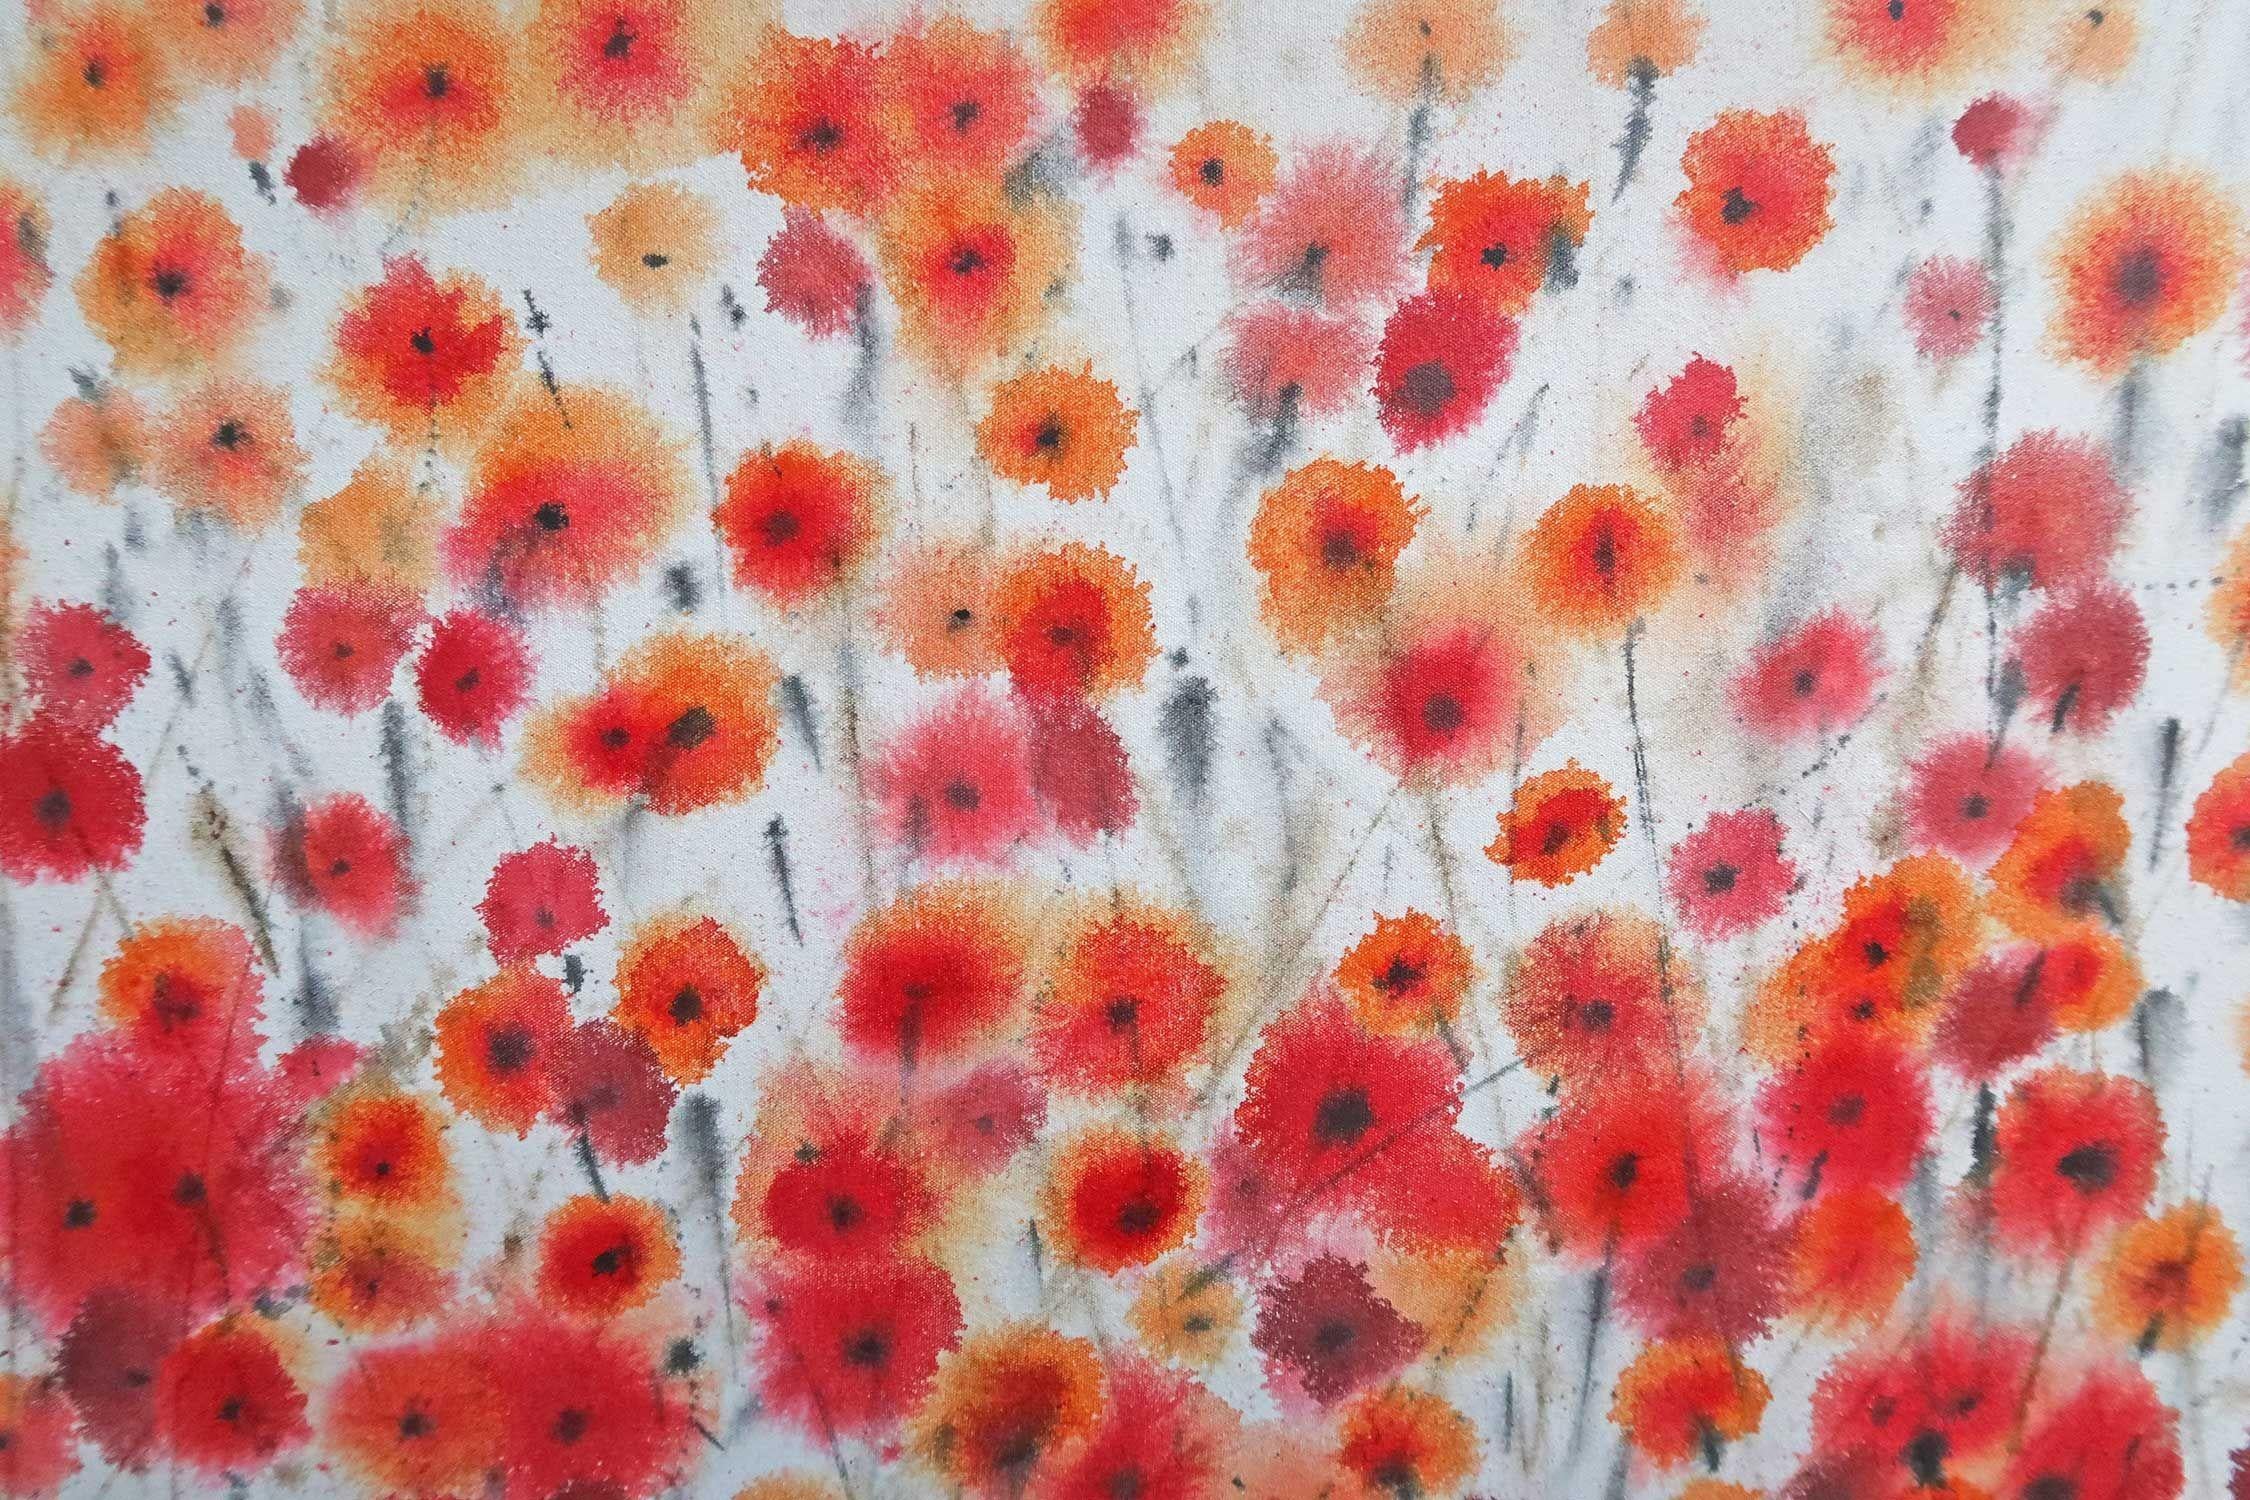 A large summer floral painting in rich red and orange. I allow the paint to flow and merge in these paintings, with a little control applied giving a sense of fluidity. An expression of beautiful bright summer days spent in The Savill Garden in